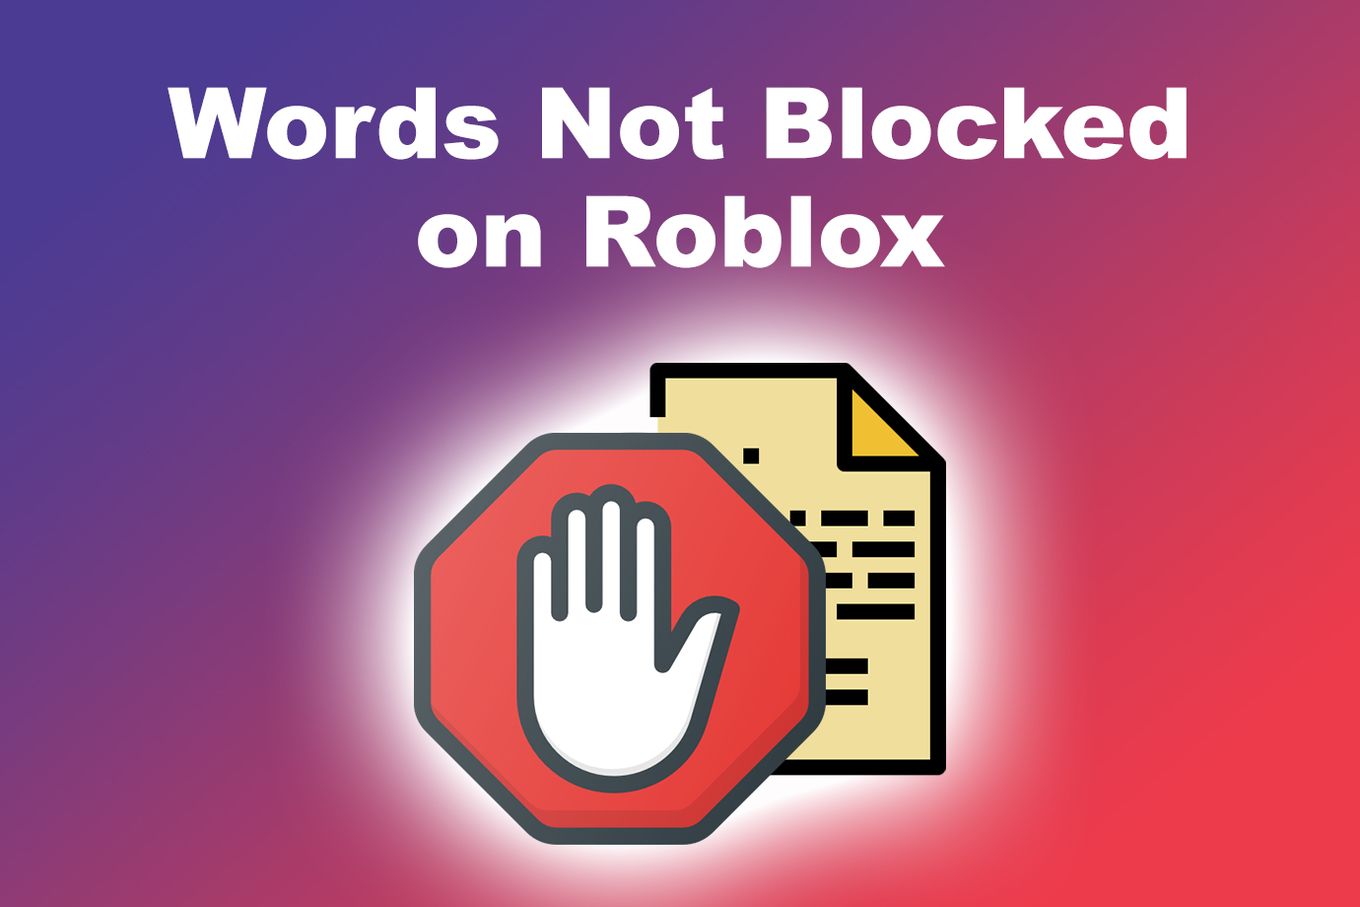 Words Not Blocked on Roblox